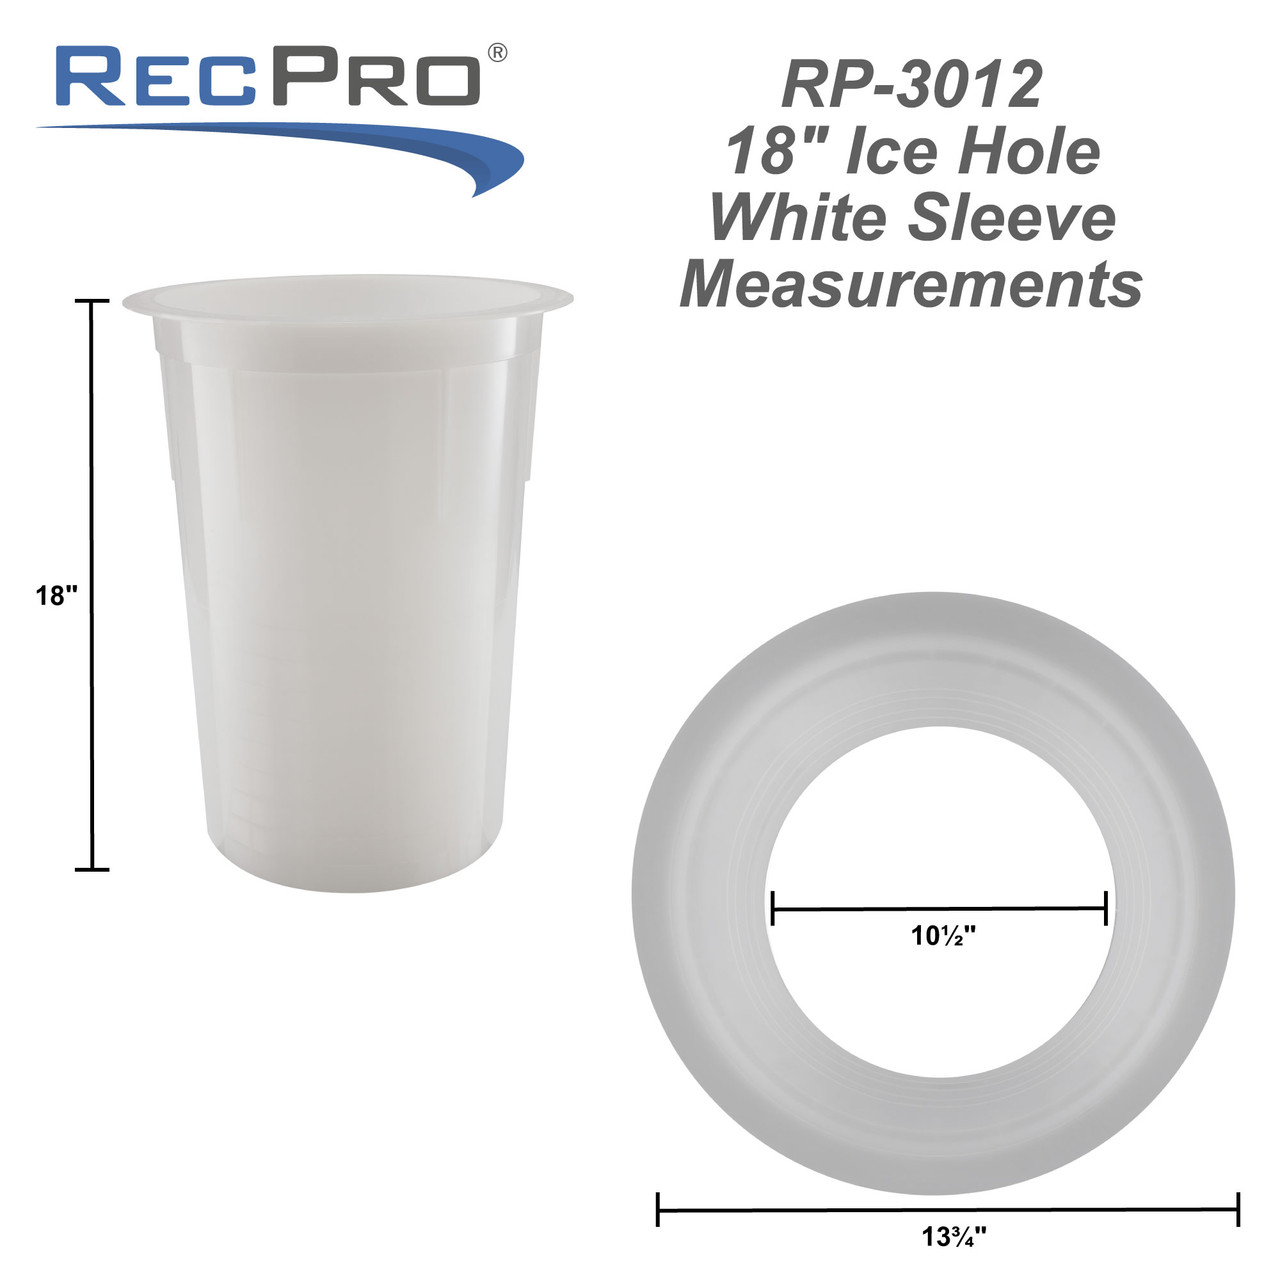 https://cdn11.bigcommerce.com/s-kwuh809851/images/stencil/1280x1280/products/2219/18918/RP-3012-18-Inch-Ice-Hole-White-Sleeve-Measurements__48075.1605290062.jpg?c=2?imbypass=on